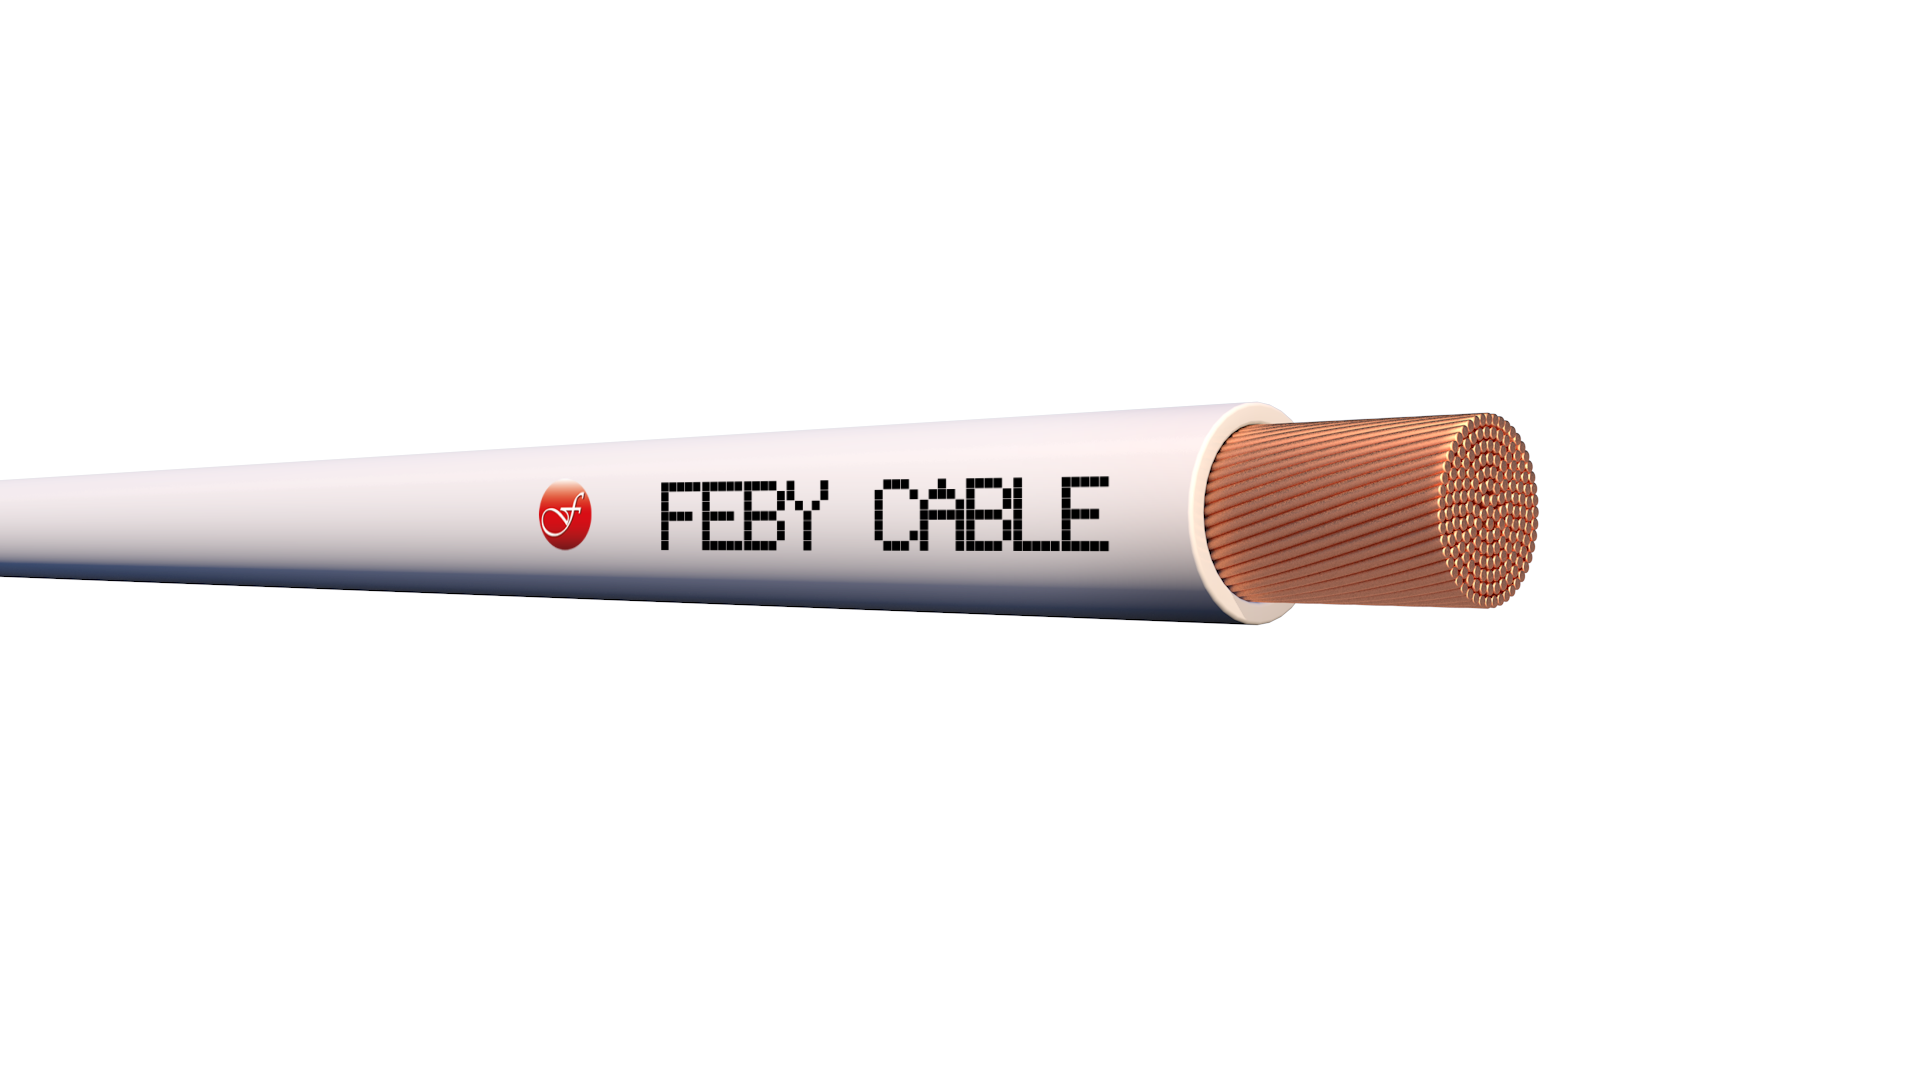 Feby Cable